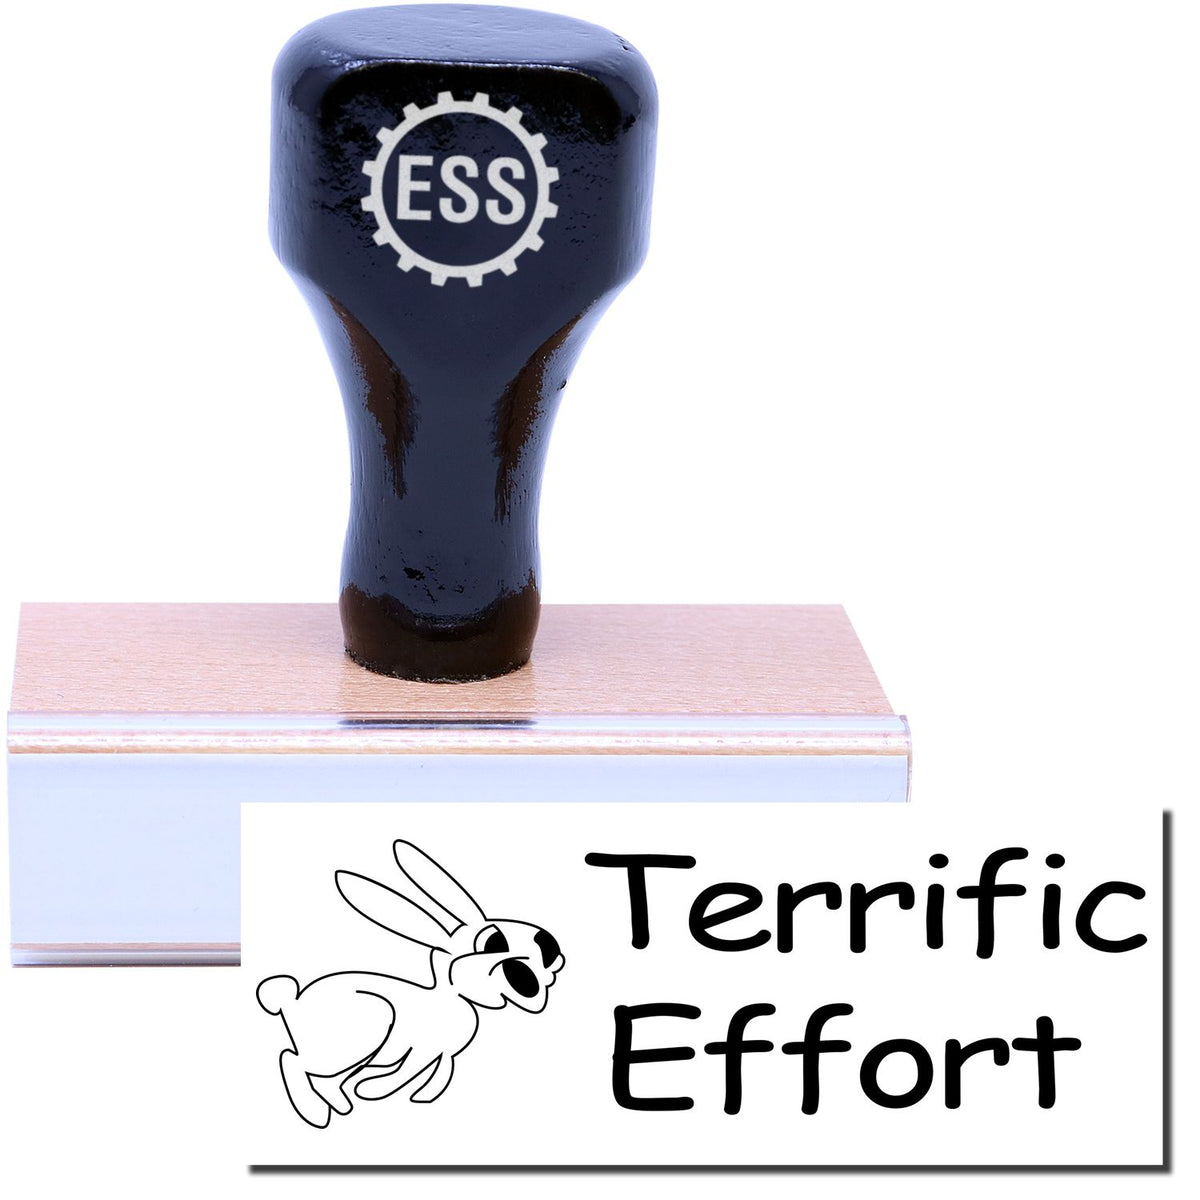 A stock office rubber stamp with a stamped image showing how the text &quot;Terrific Effort&quot; in a large font with an image of a hopping rabbit on the left side is displayed after stamping.